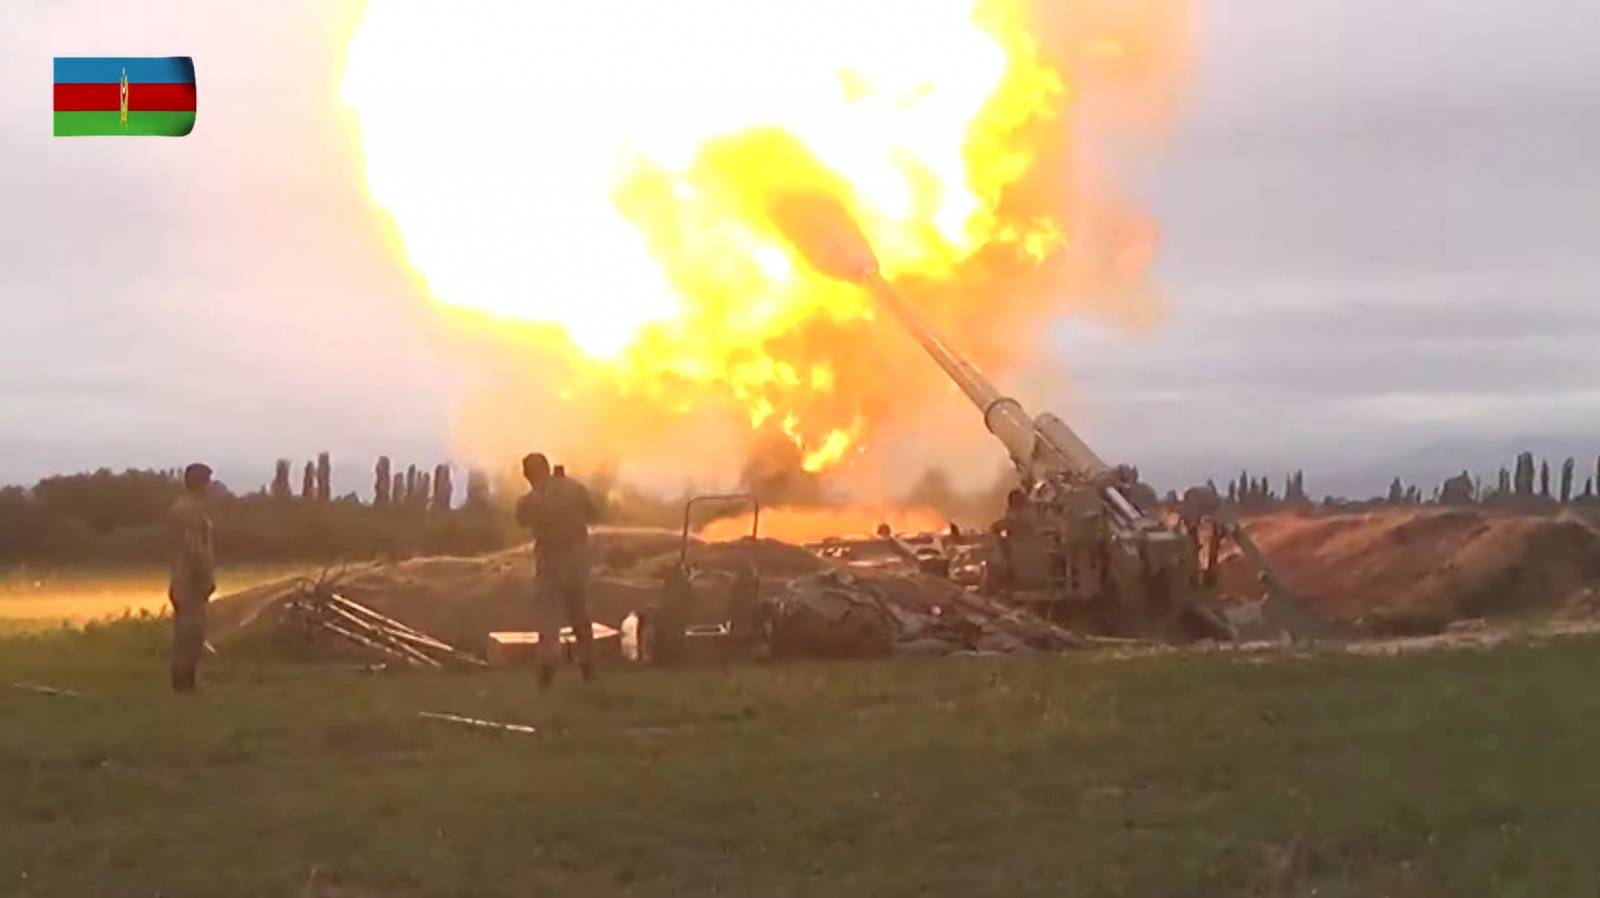 A still image shows members of Azeri armed forces firing artillery in an unidentified location